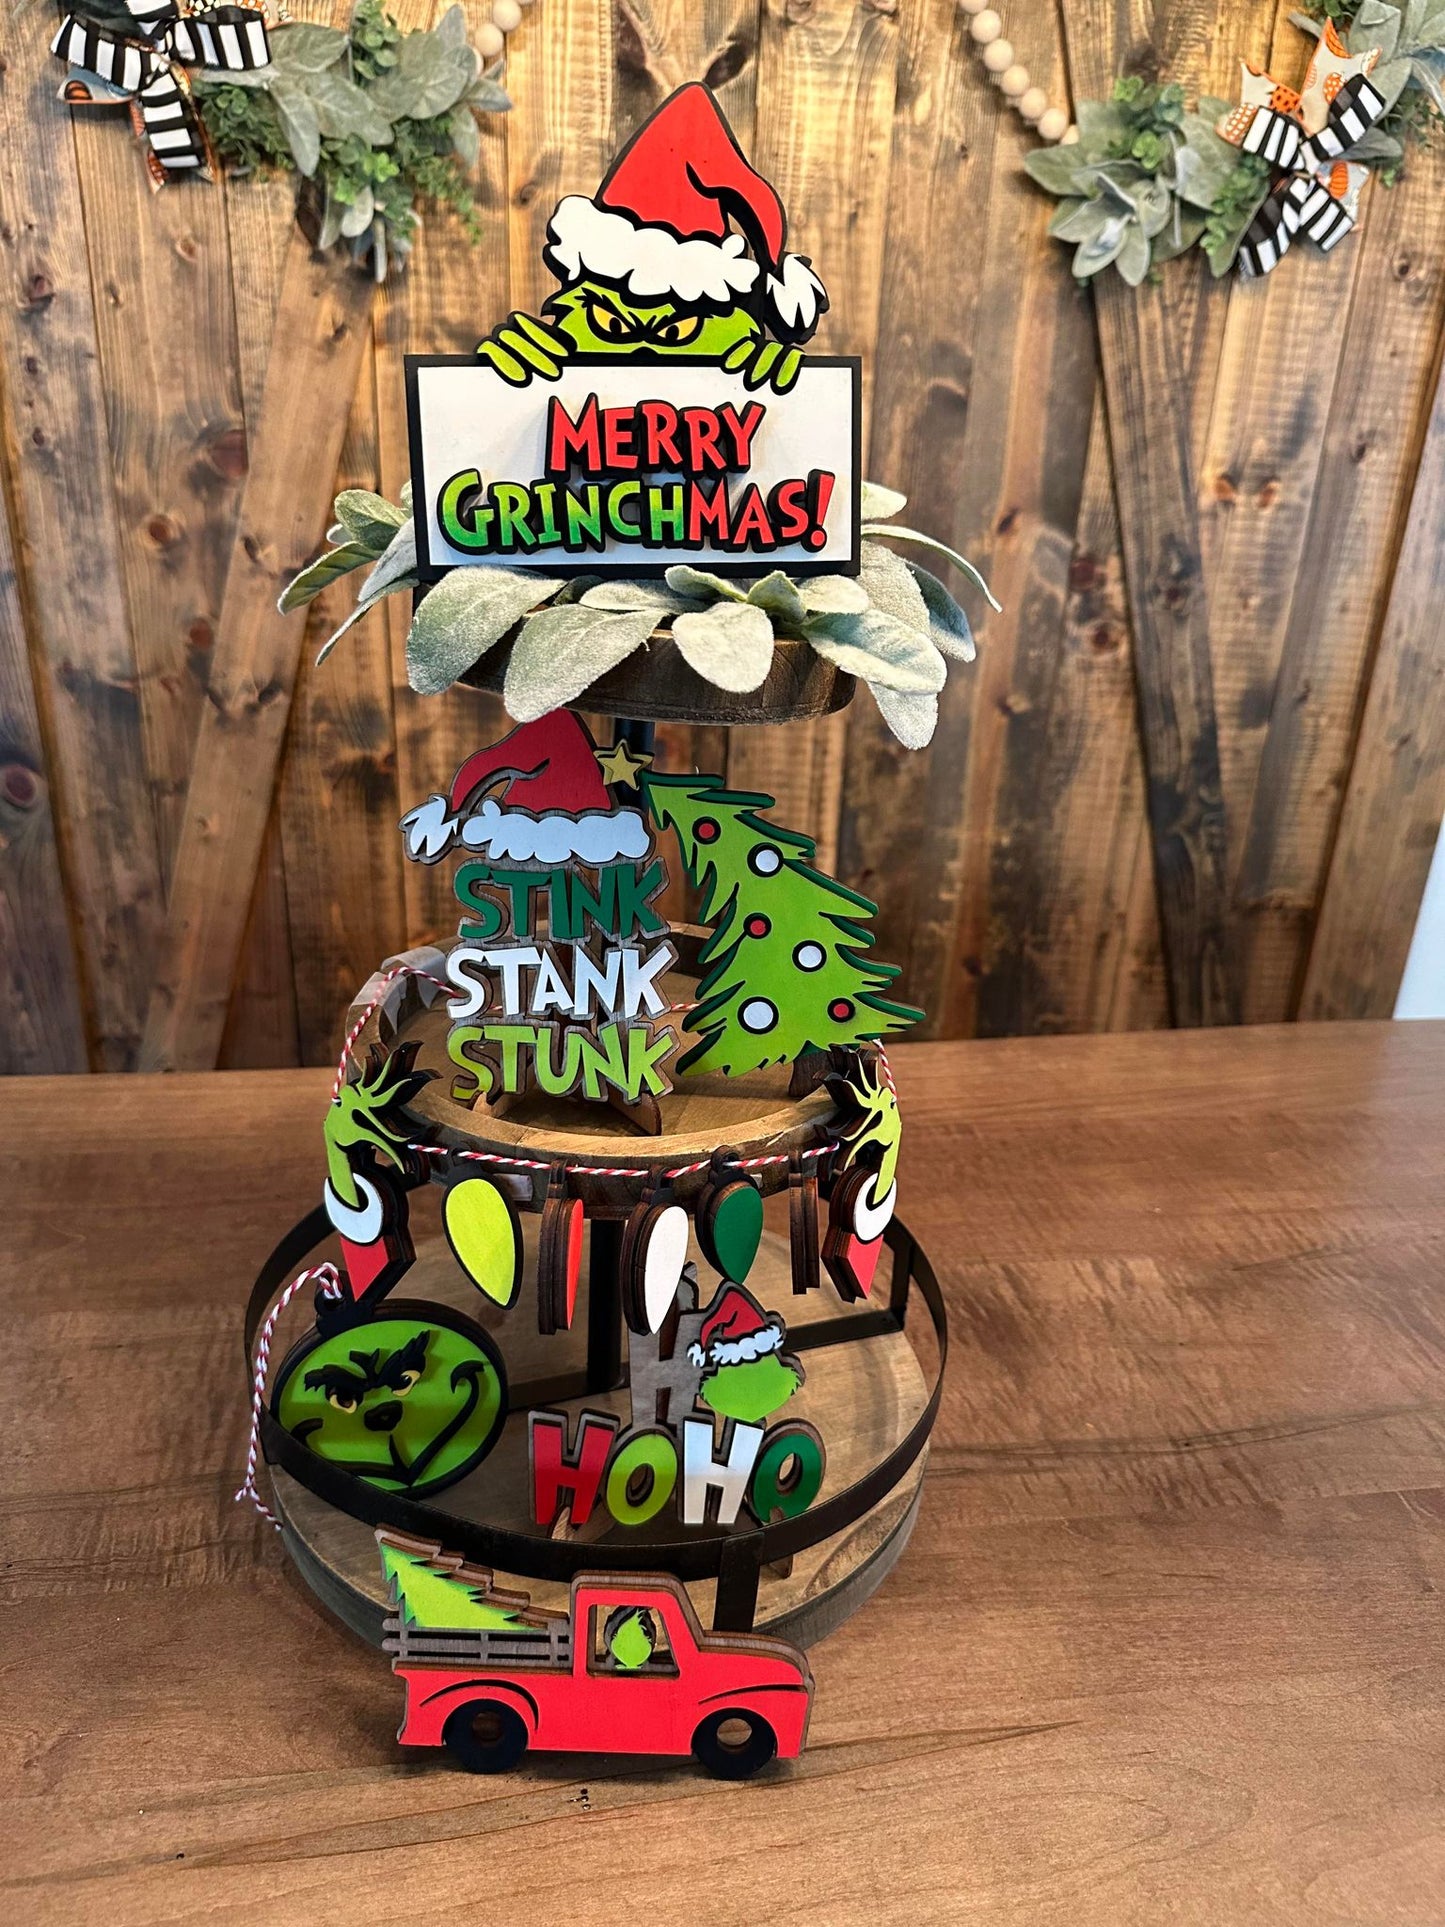 3D Tiered Tray Decor - Mean one - Merry Grinchmas